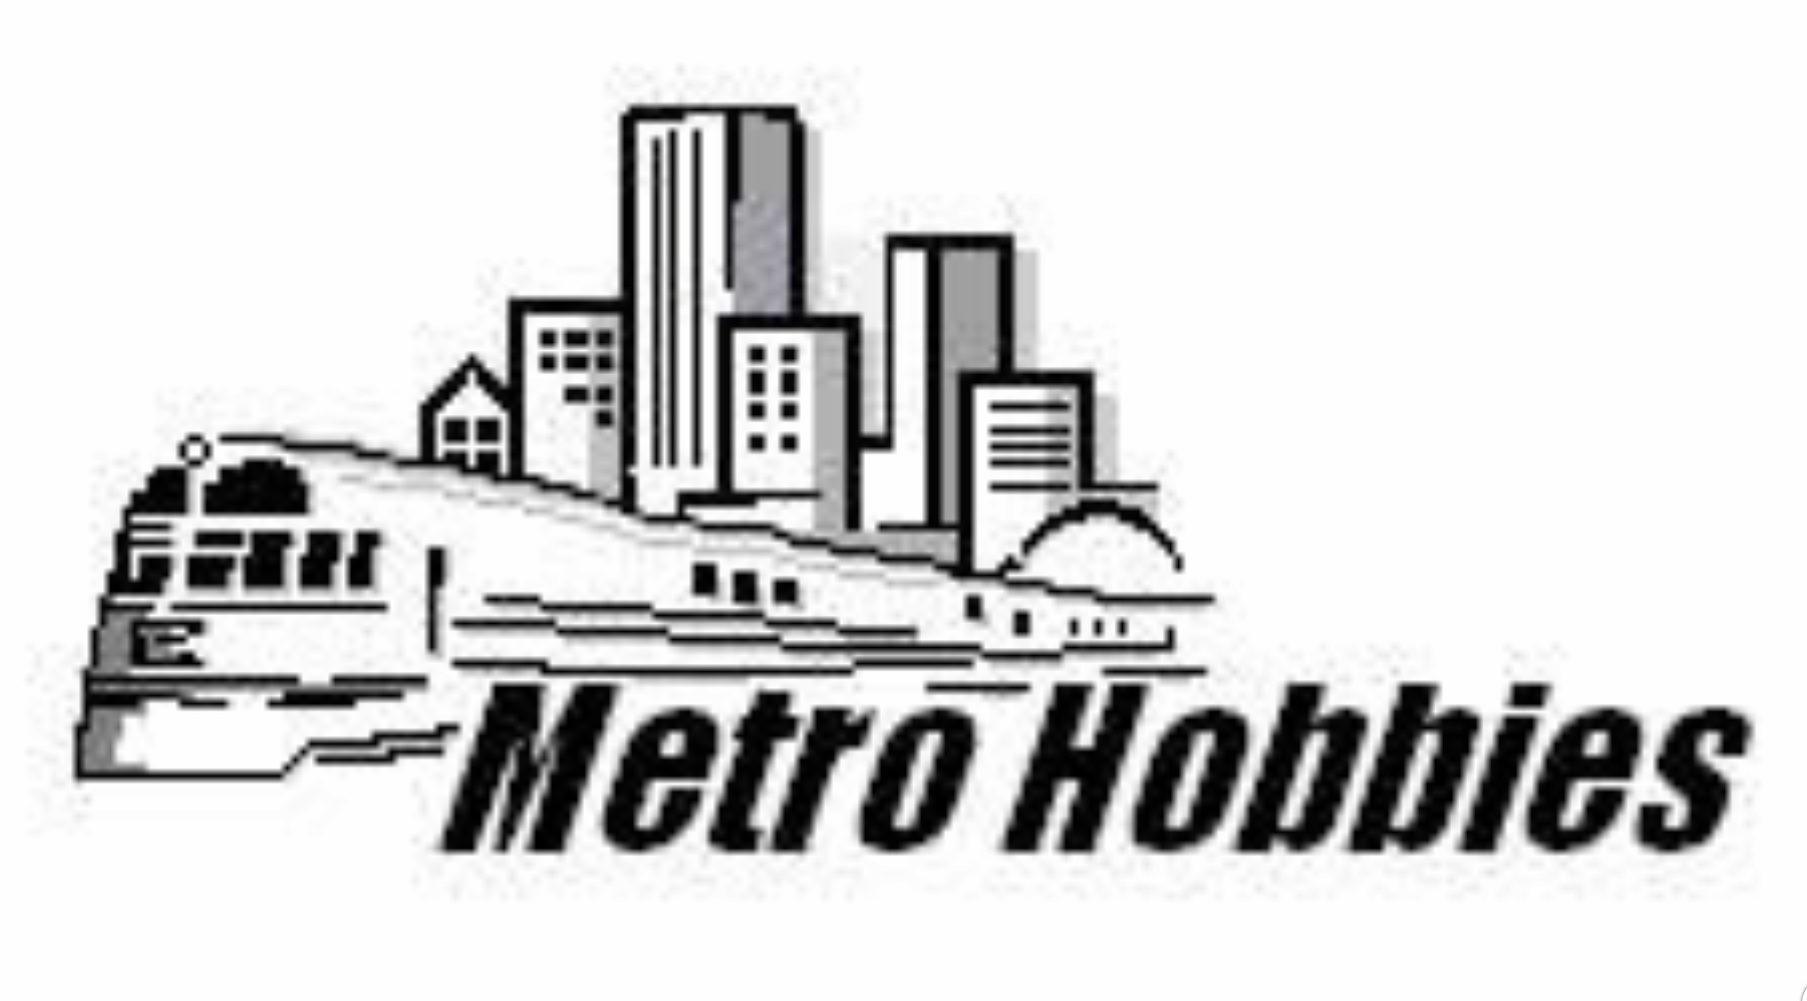 Official logo of Metro Hobbies. A Streamlined Zephyr train set passes in front of several high rises with “Metro Hobbies” in speed lettering below.